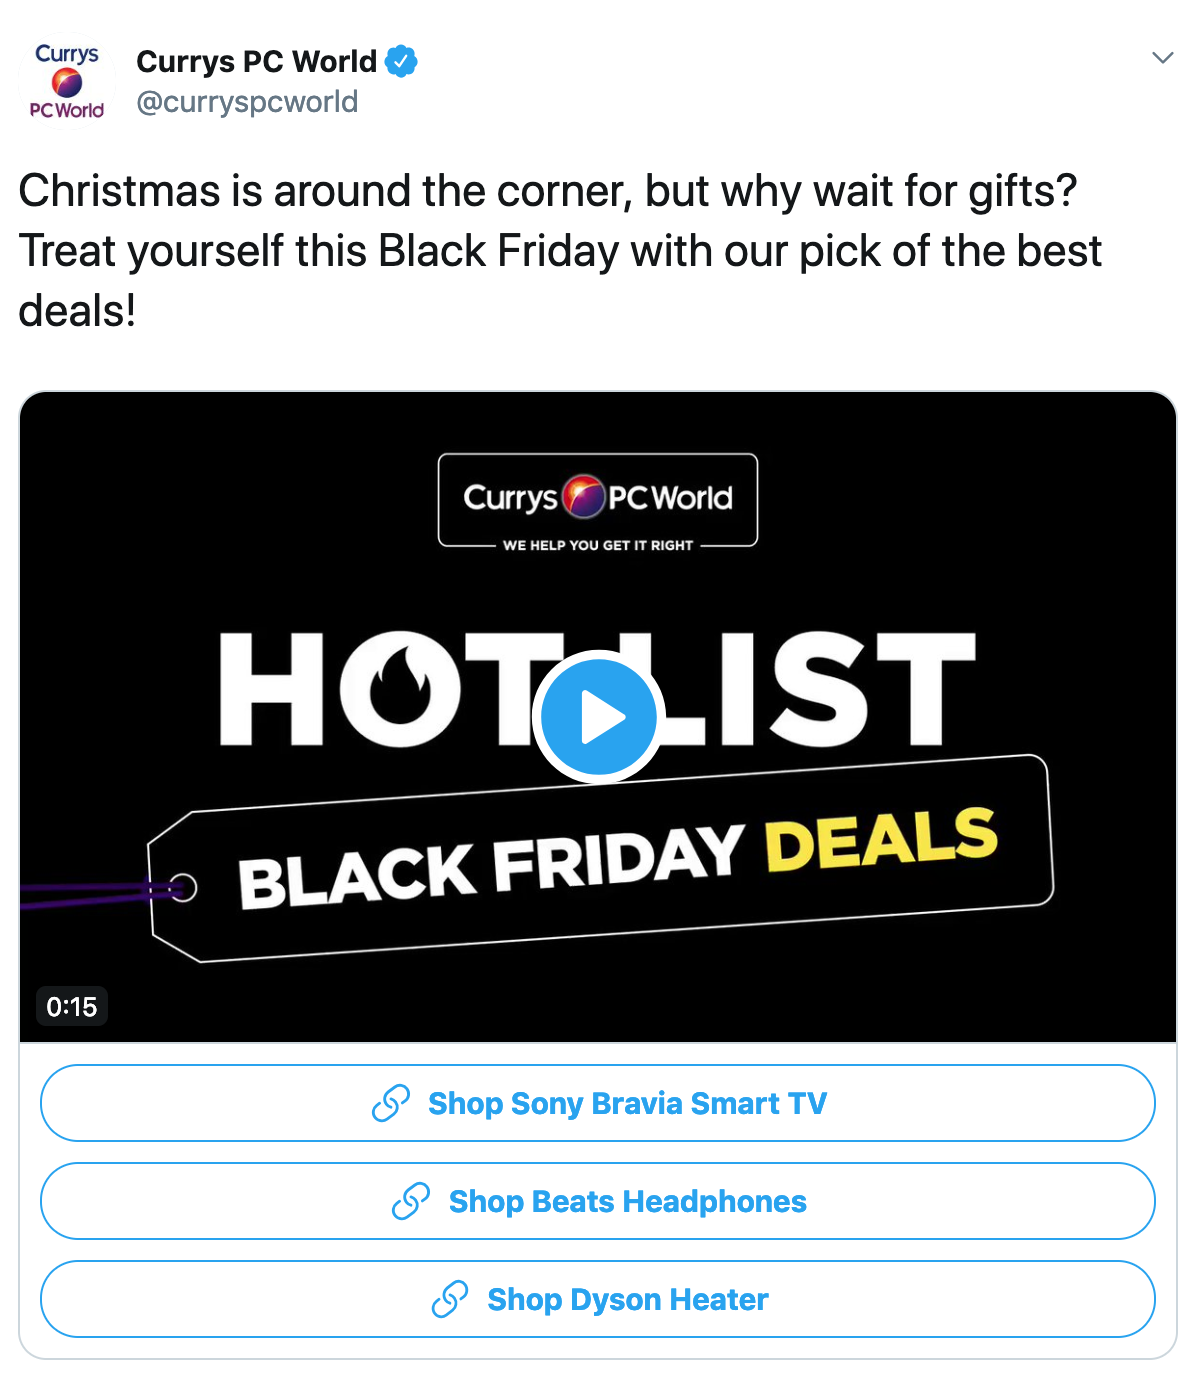 Dixons Currys Pc World Wins Black Friday Shoppers With Multi Cta Videos